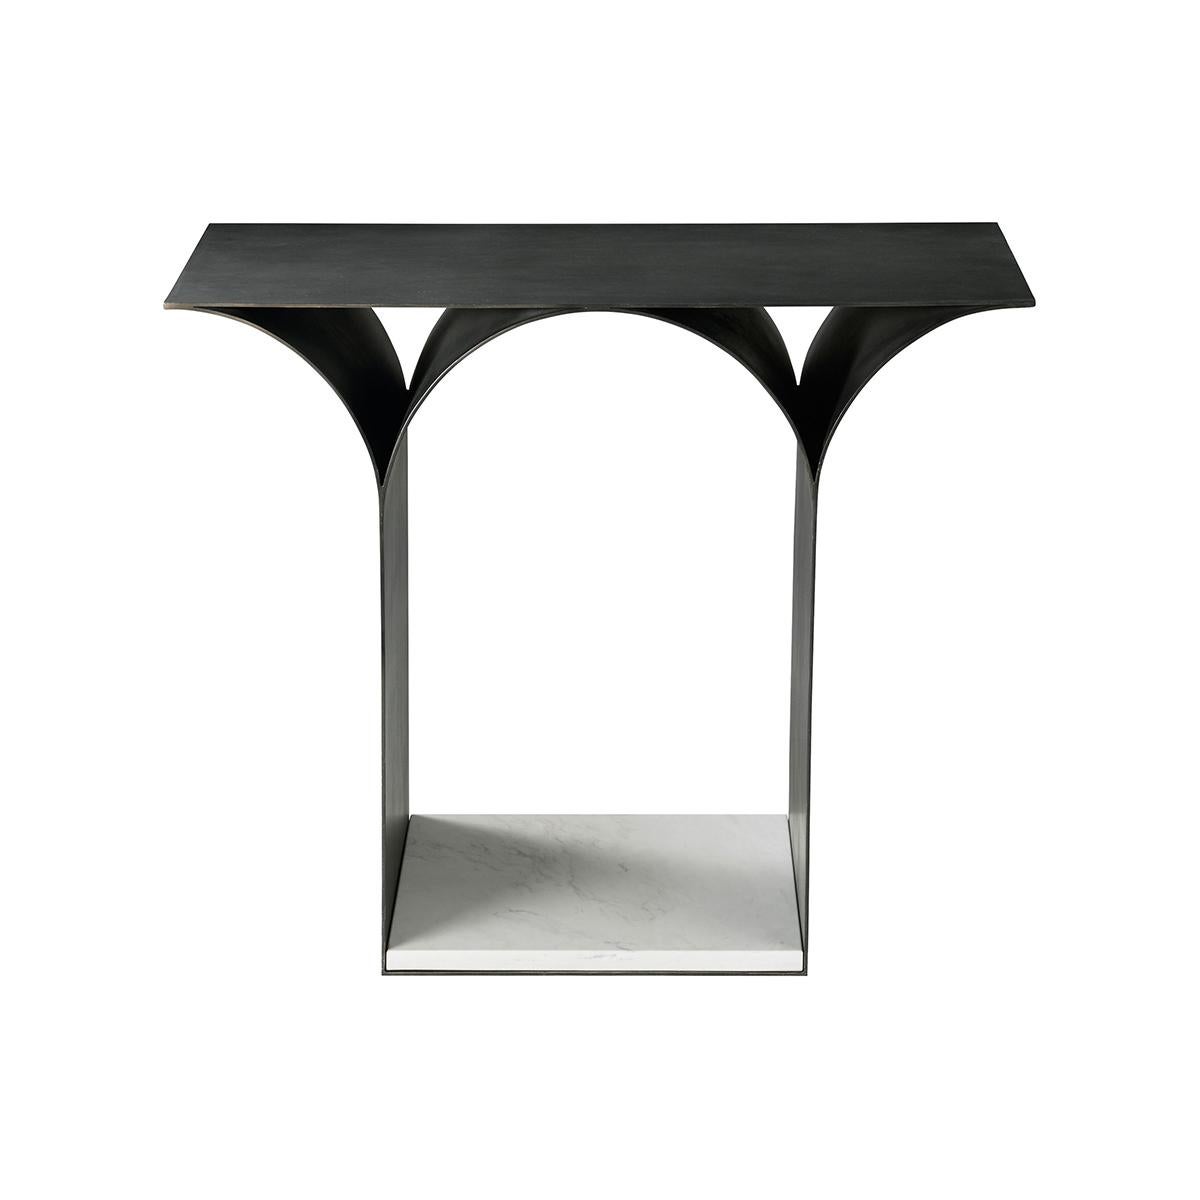 An unusual elegant table Inspired by the sculptural architecture of today, the modern table provides the perfect mix of materials in a minimalist style. Contemporary steel in a dark finish that pairs perfectly with the marble base.

Dimensions: 30